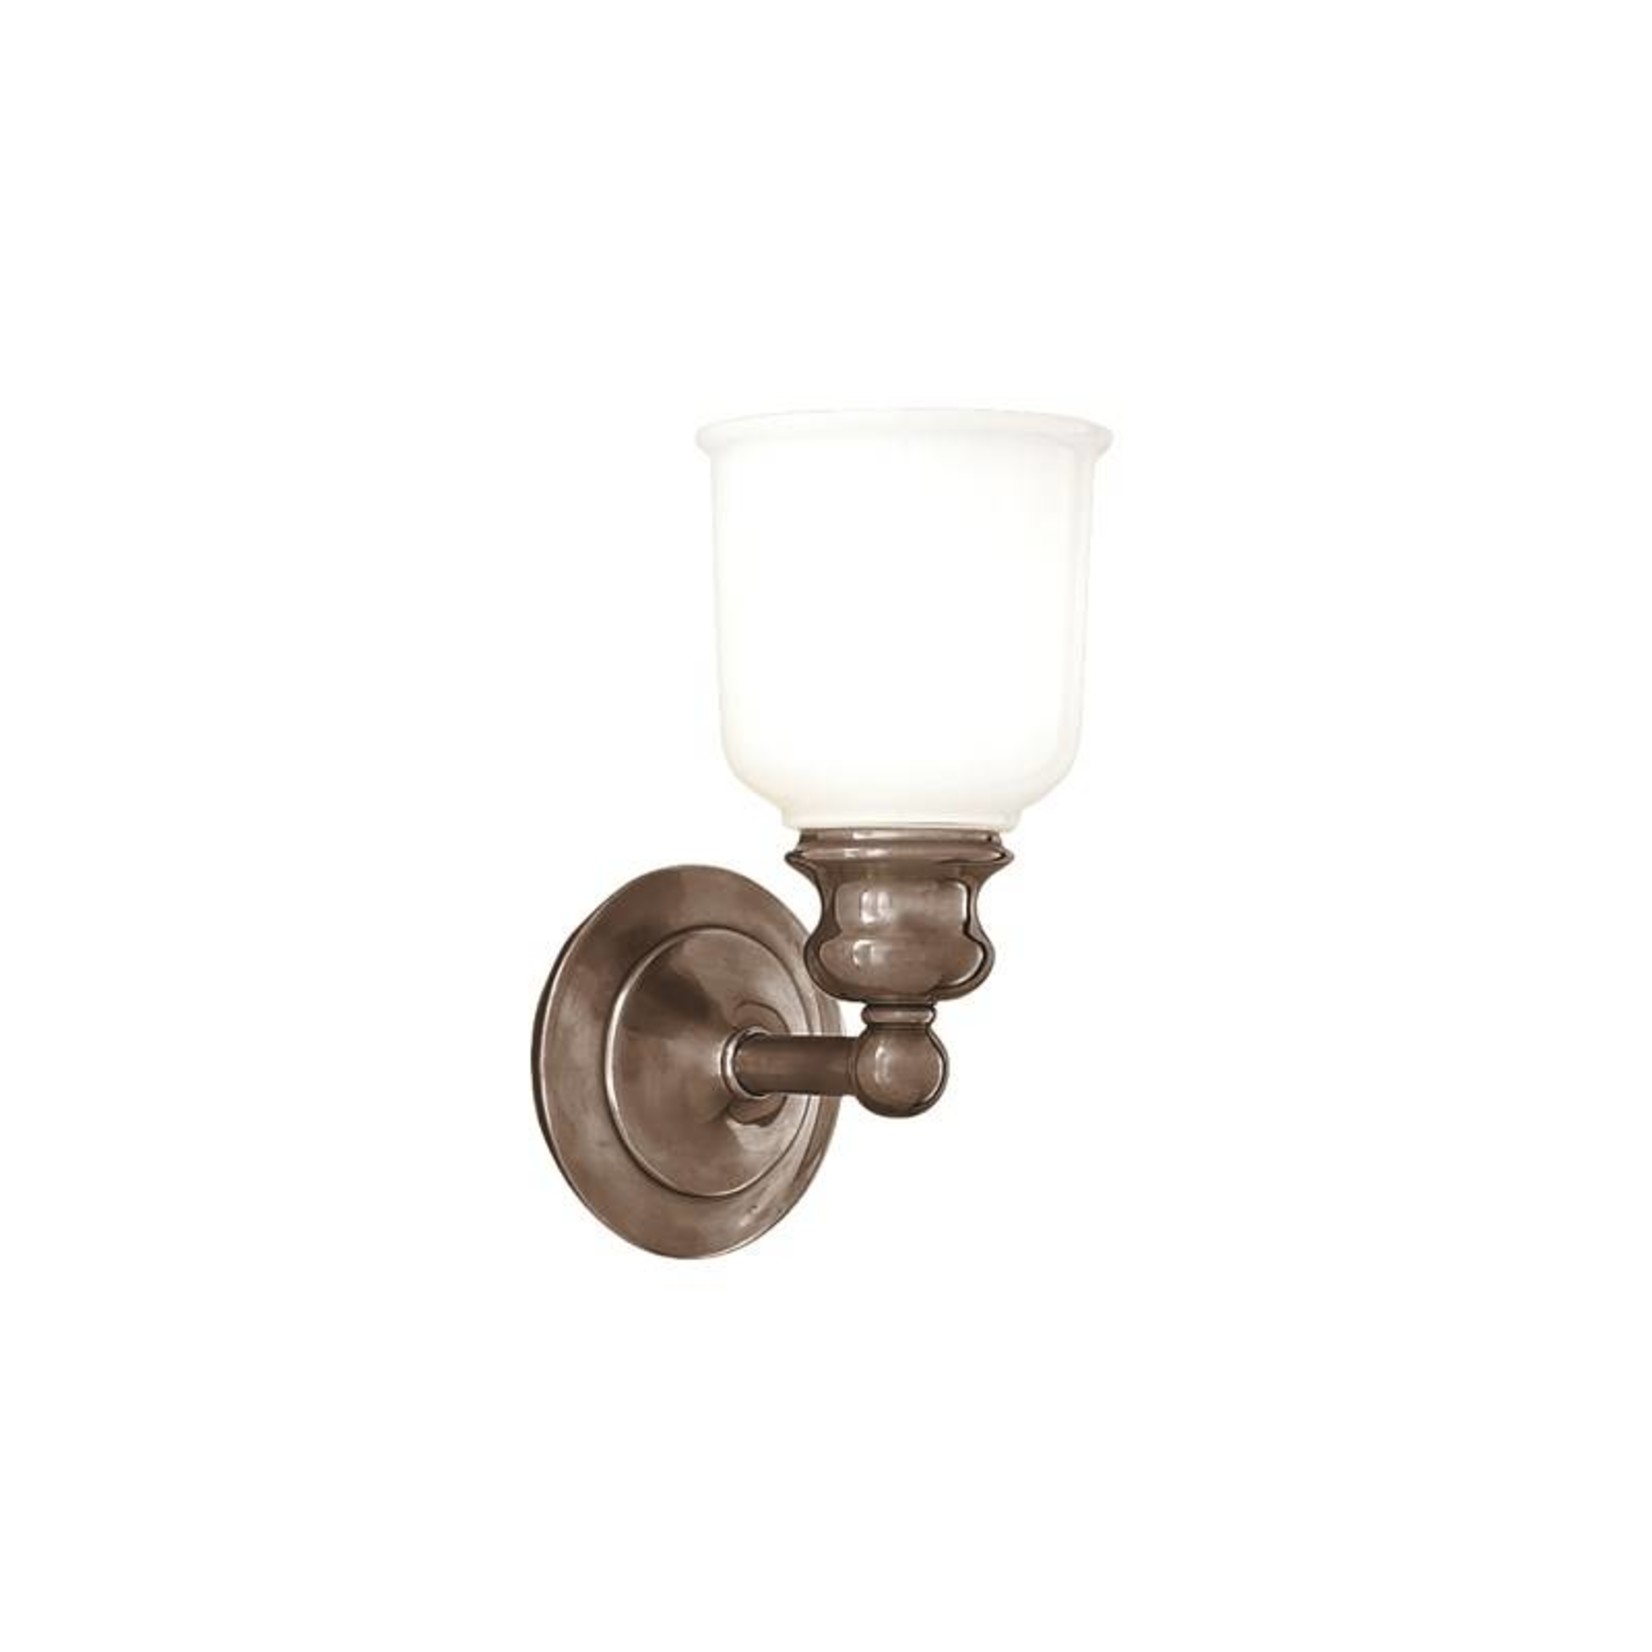 Hudson Valley Wall Sconce Antique Nickel